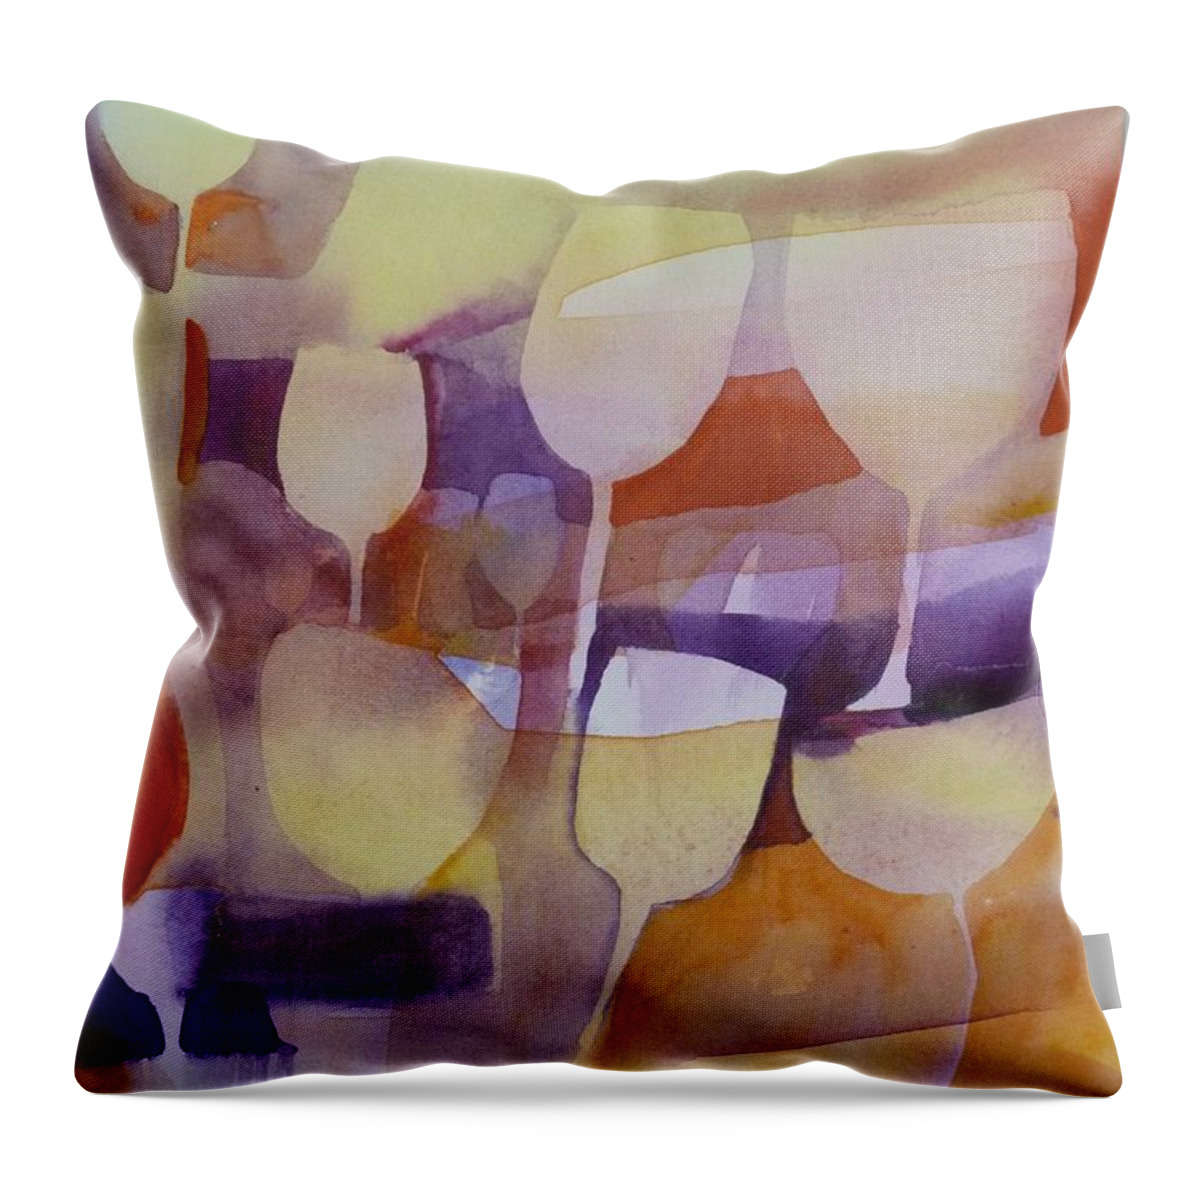 Tulips Throw Pillow featuring the painting On ne voit que des Tulipes by Donna Acheson-Juillet